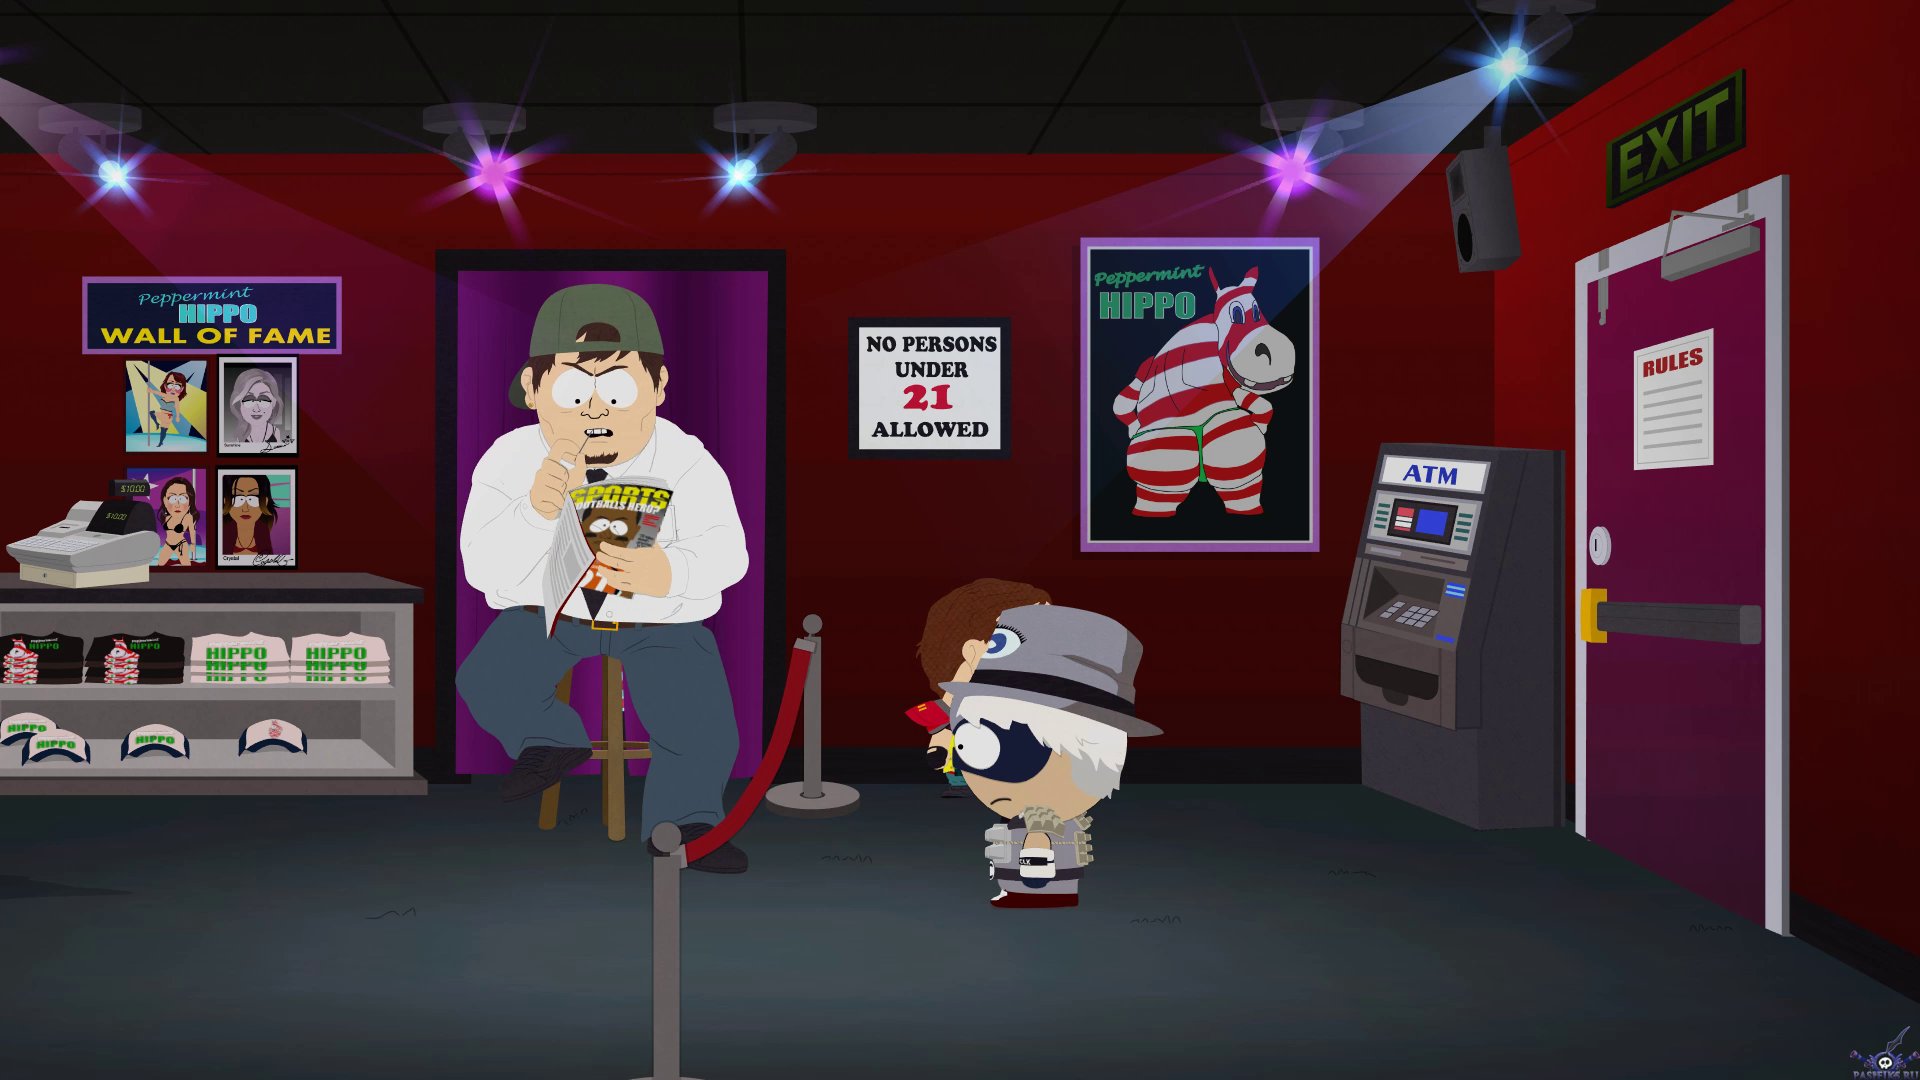 pc-16-south-park-the-fractured-but-whole---chrevo-zverya